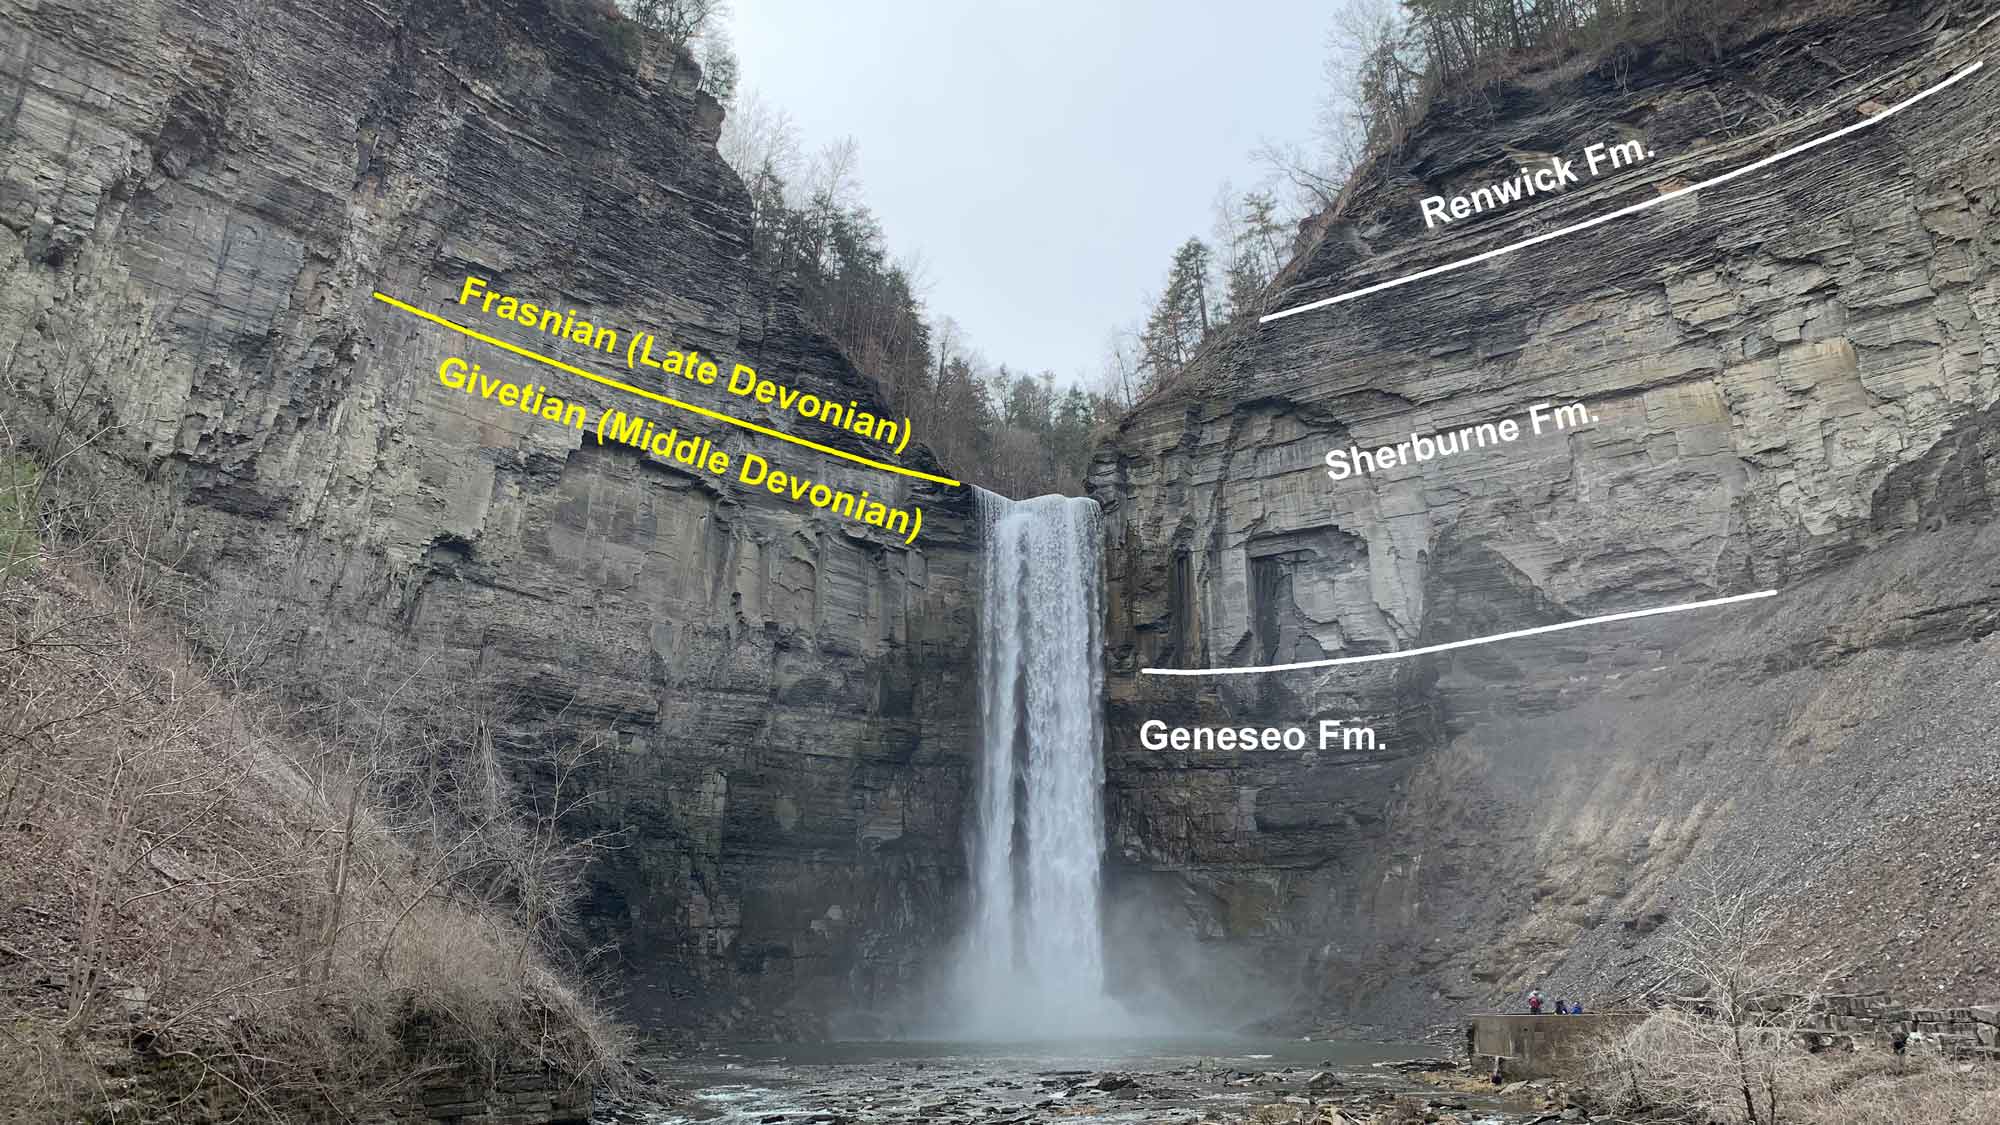 Photograph of Taughannock Falls with major stratigraphic units identified.